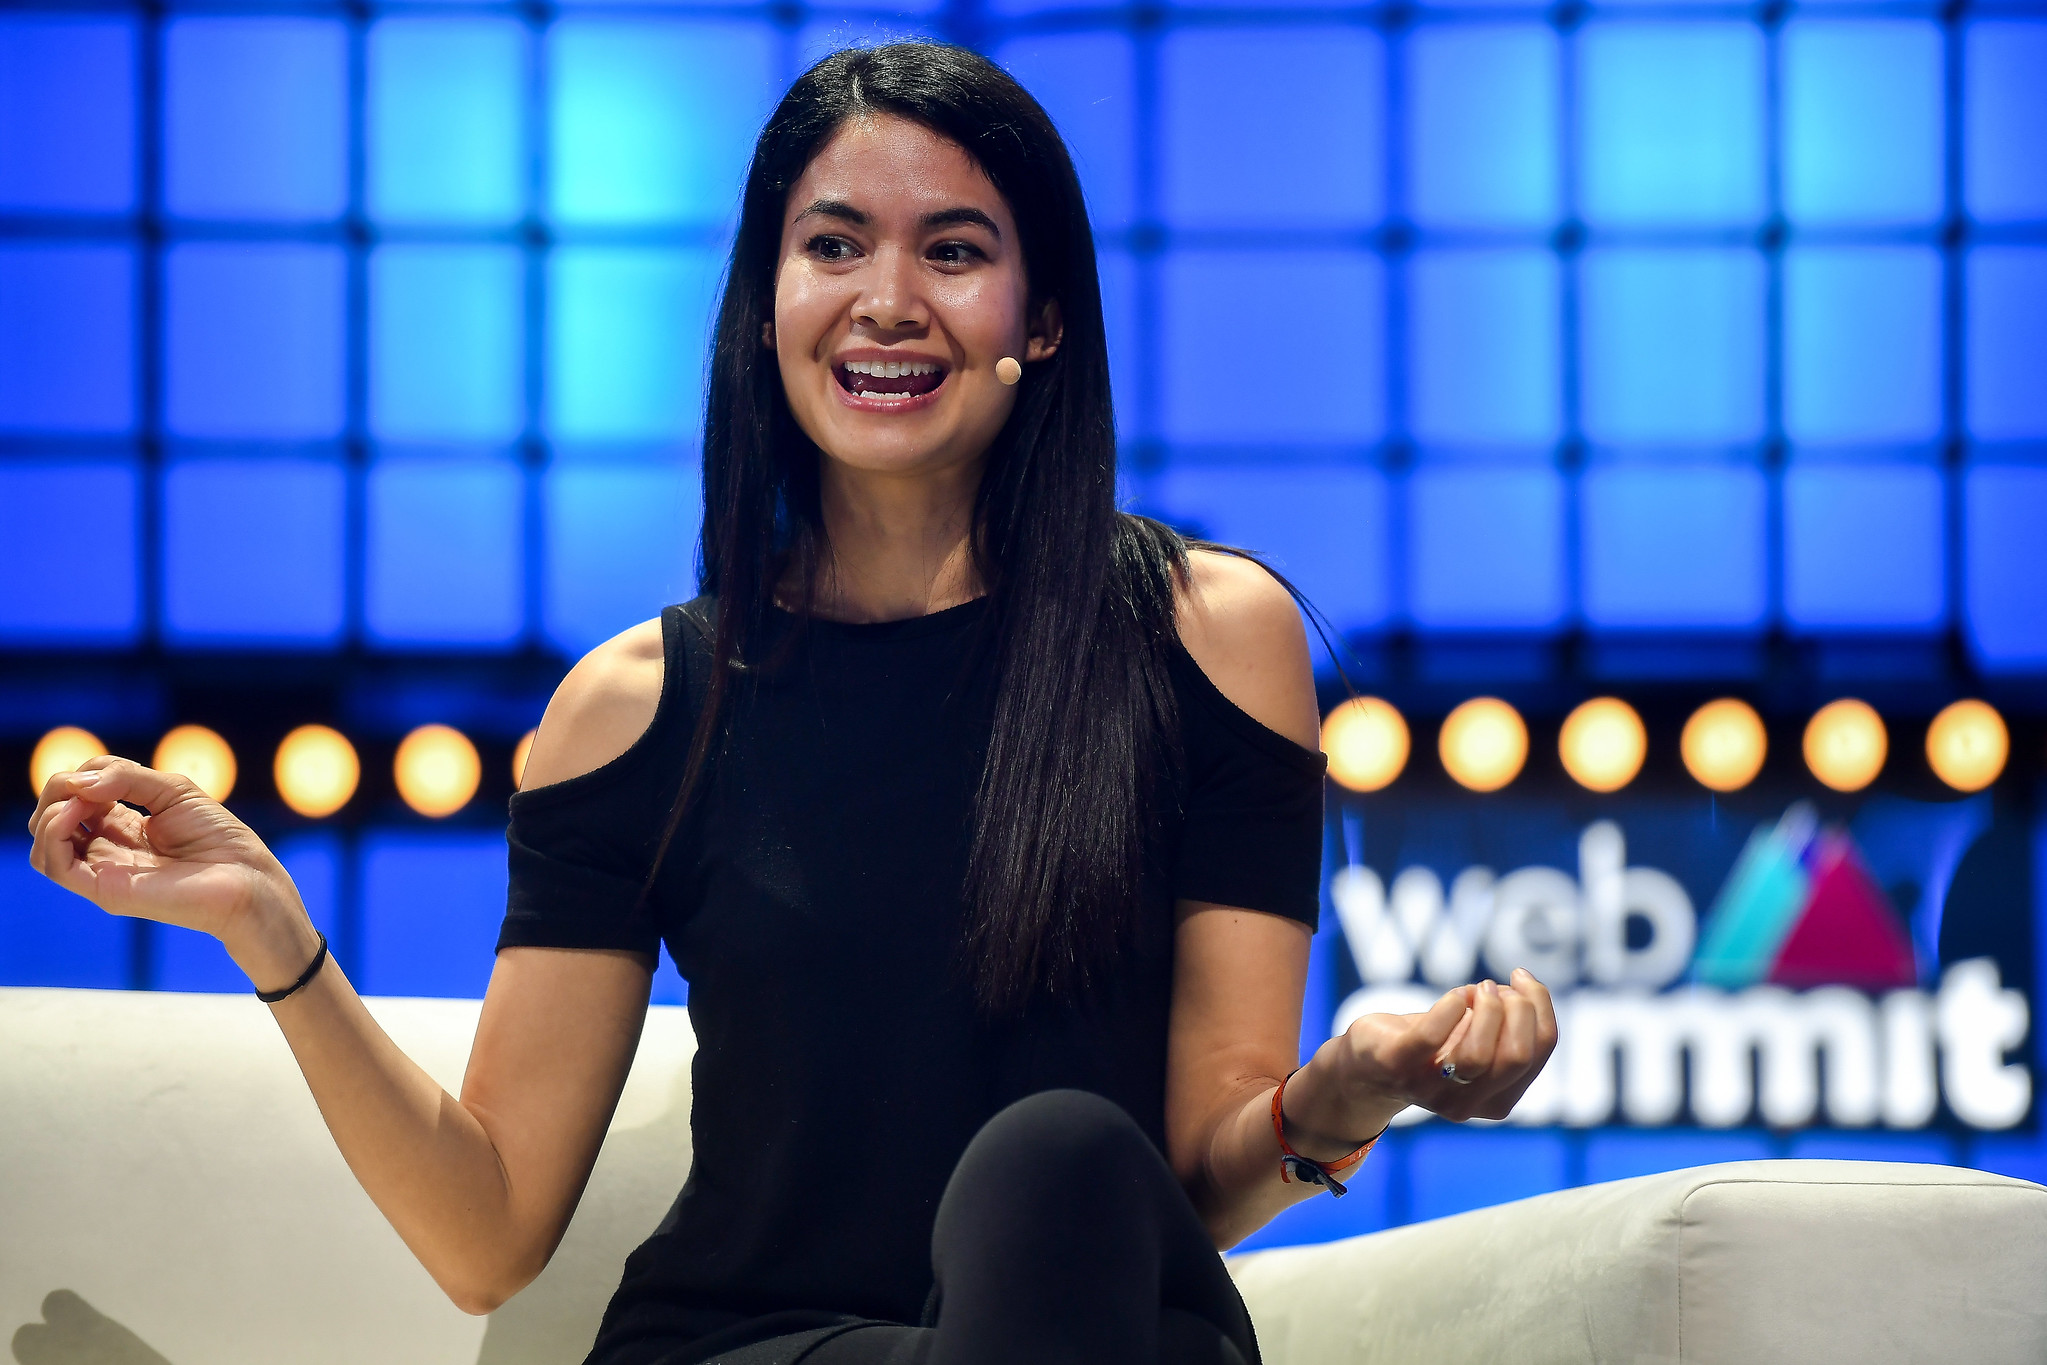 Photograph of a person (Melanie Perkins, co-founder and CEO of Canva) on stage at Web Summit. The person is sitting on a chair with their hands lifted on either side of them. The Web Summit logo is visible on the stage background behind the person.